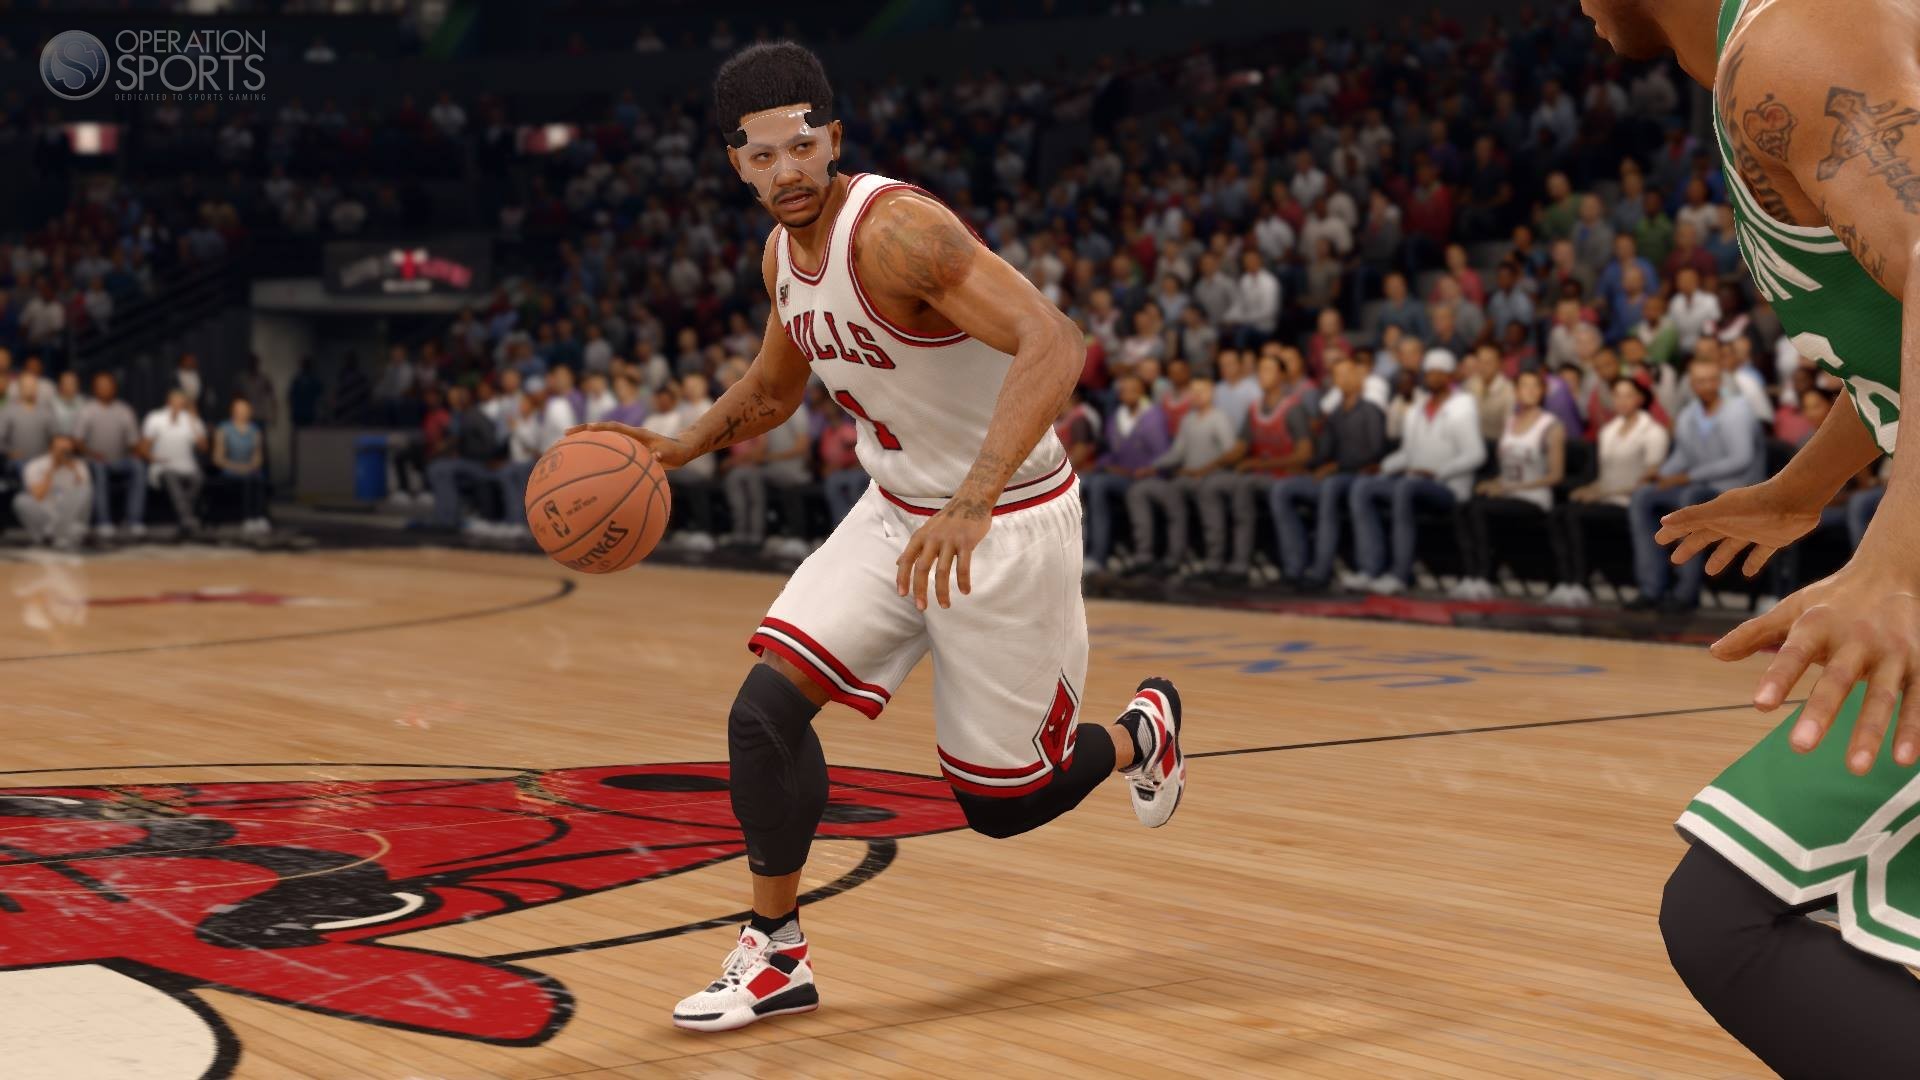 1920x1080 NBA Live 16 Roster Update Available Now, Details Included (12-3-15)